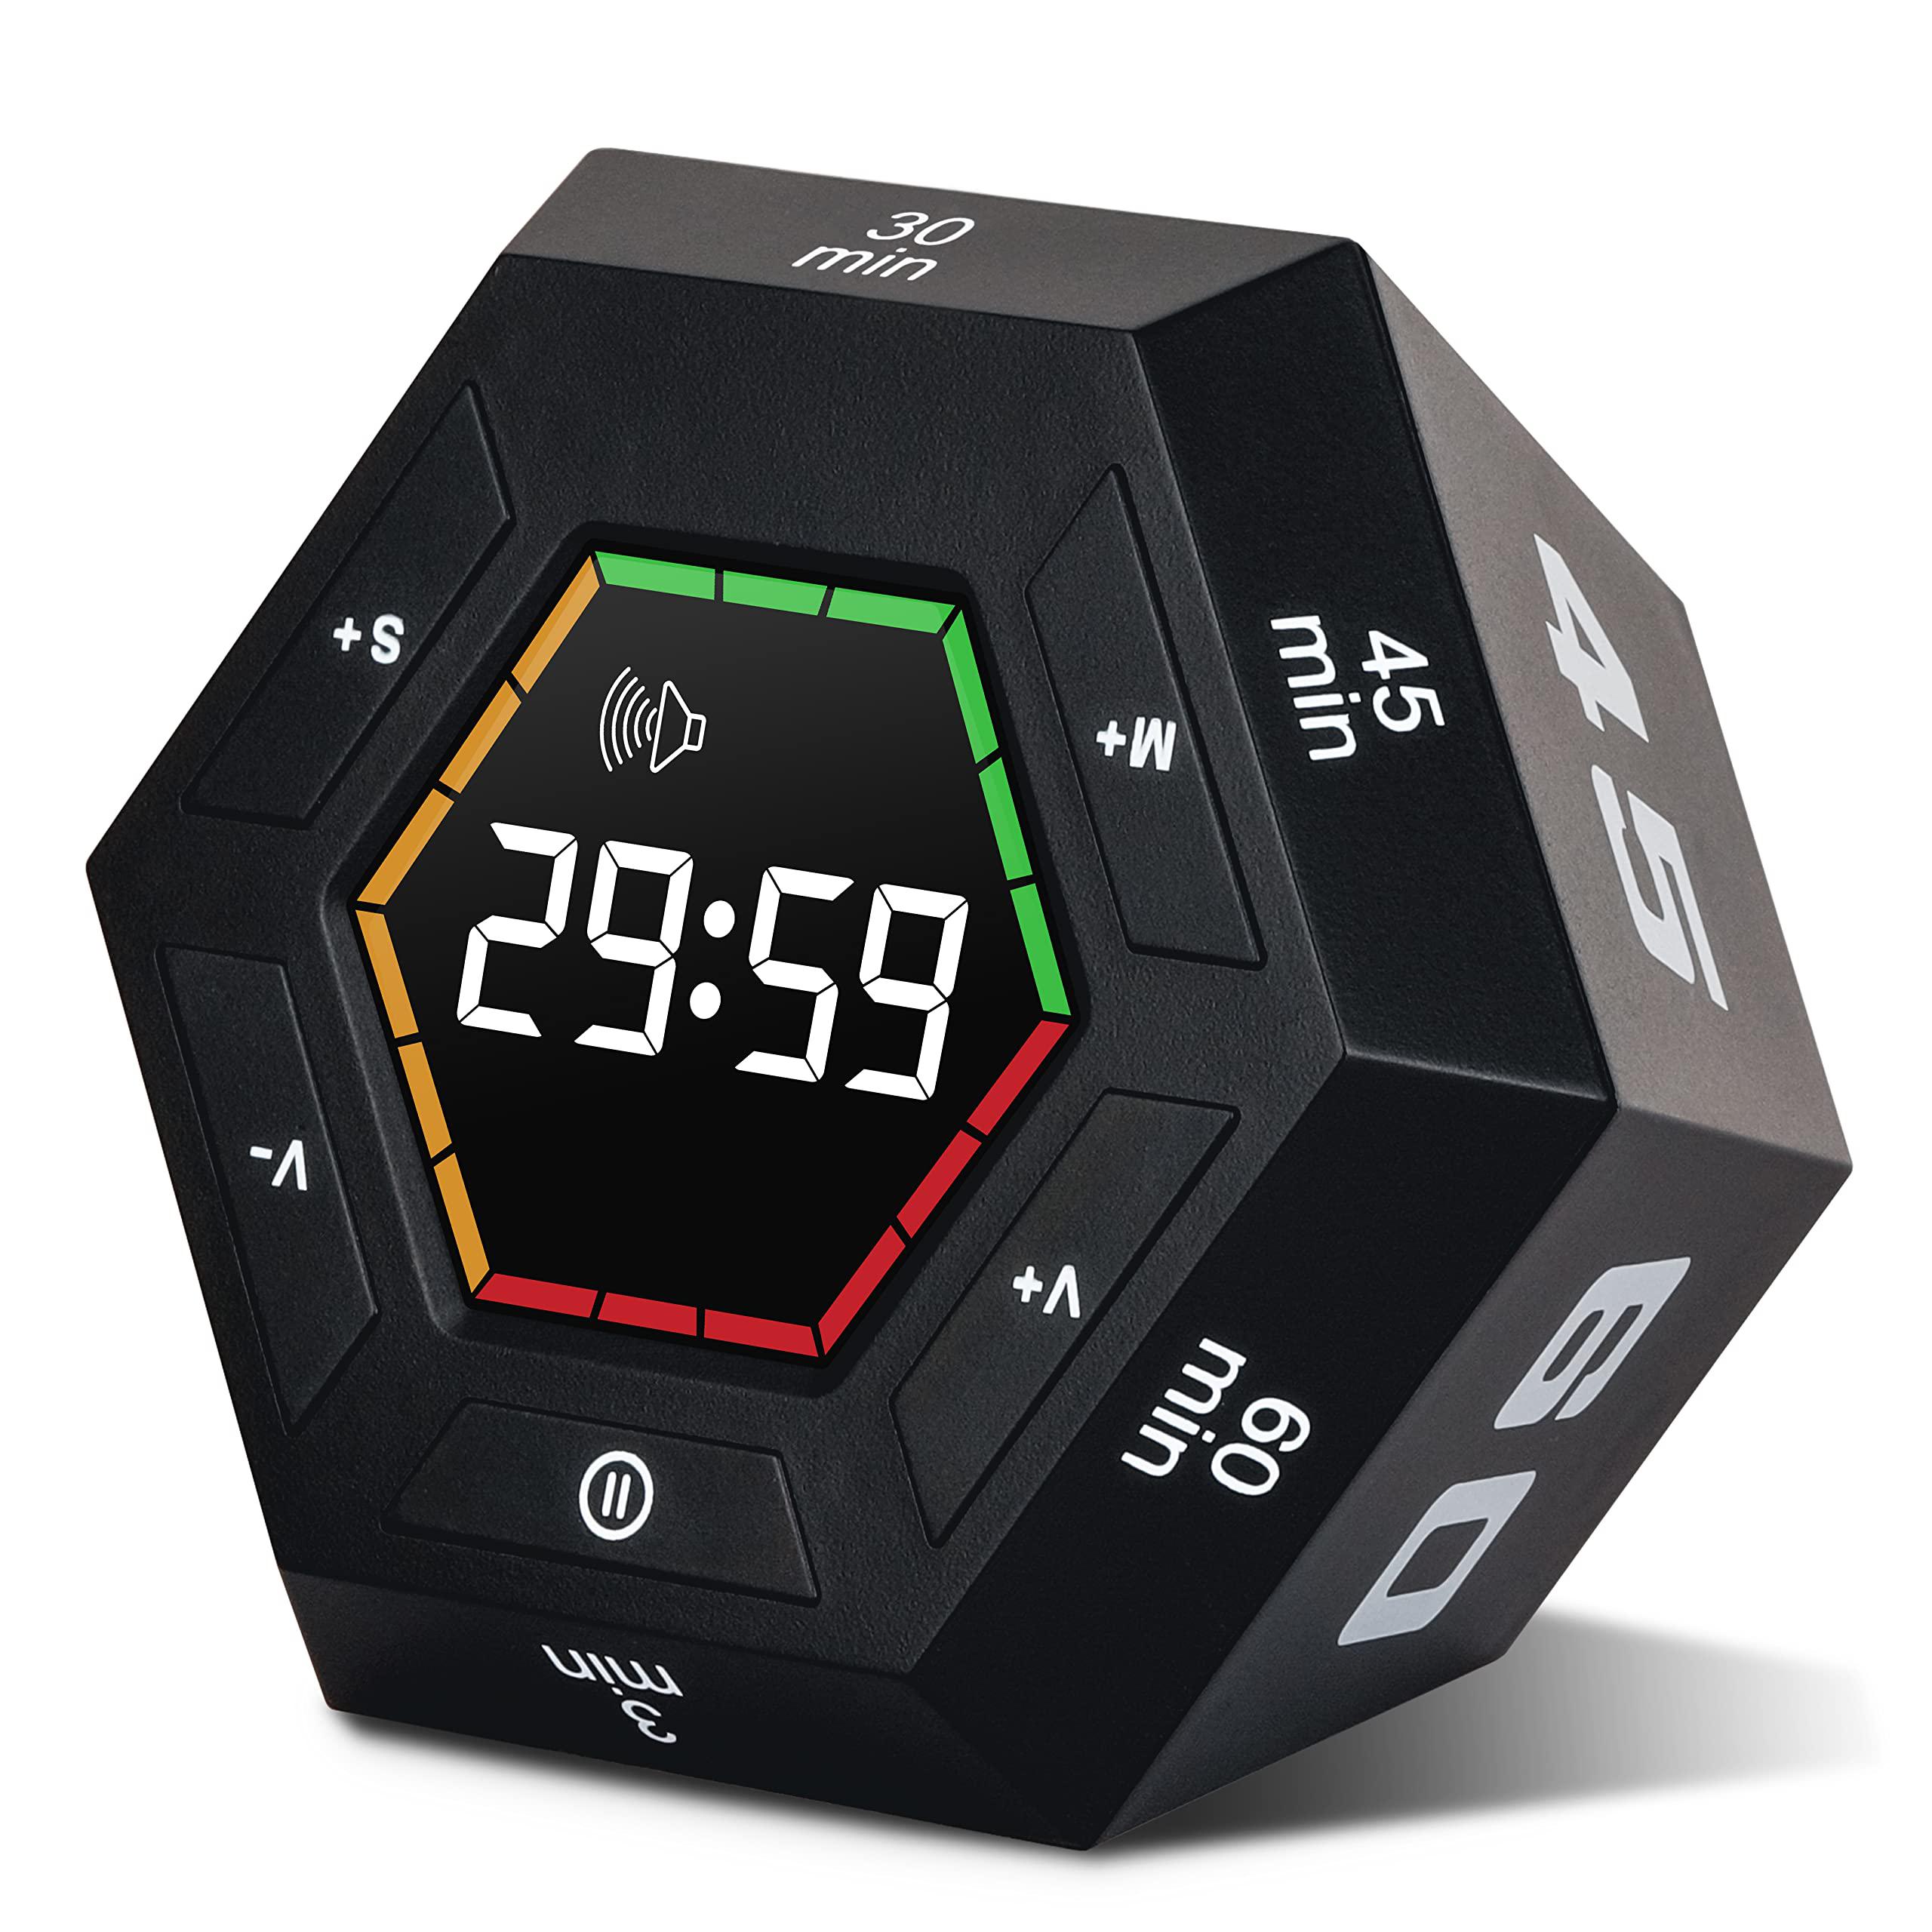 haiphisi pomodoro timer, productivity timer cube,3,5,15, 30, 45, 60 minute preset smart countdown timer, easy-to-use time man